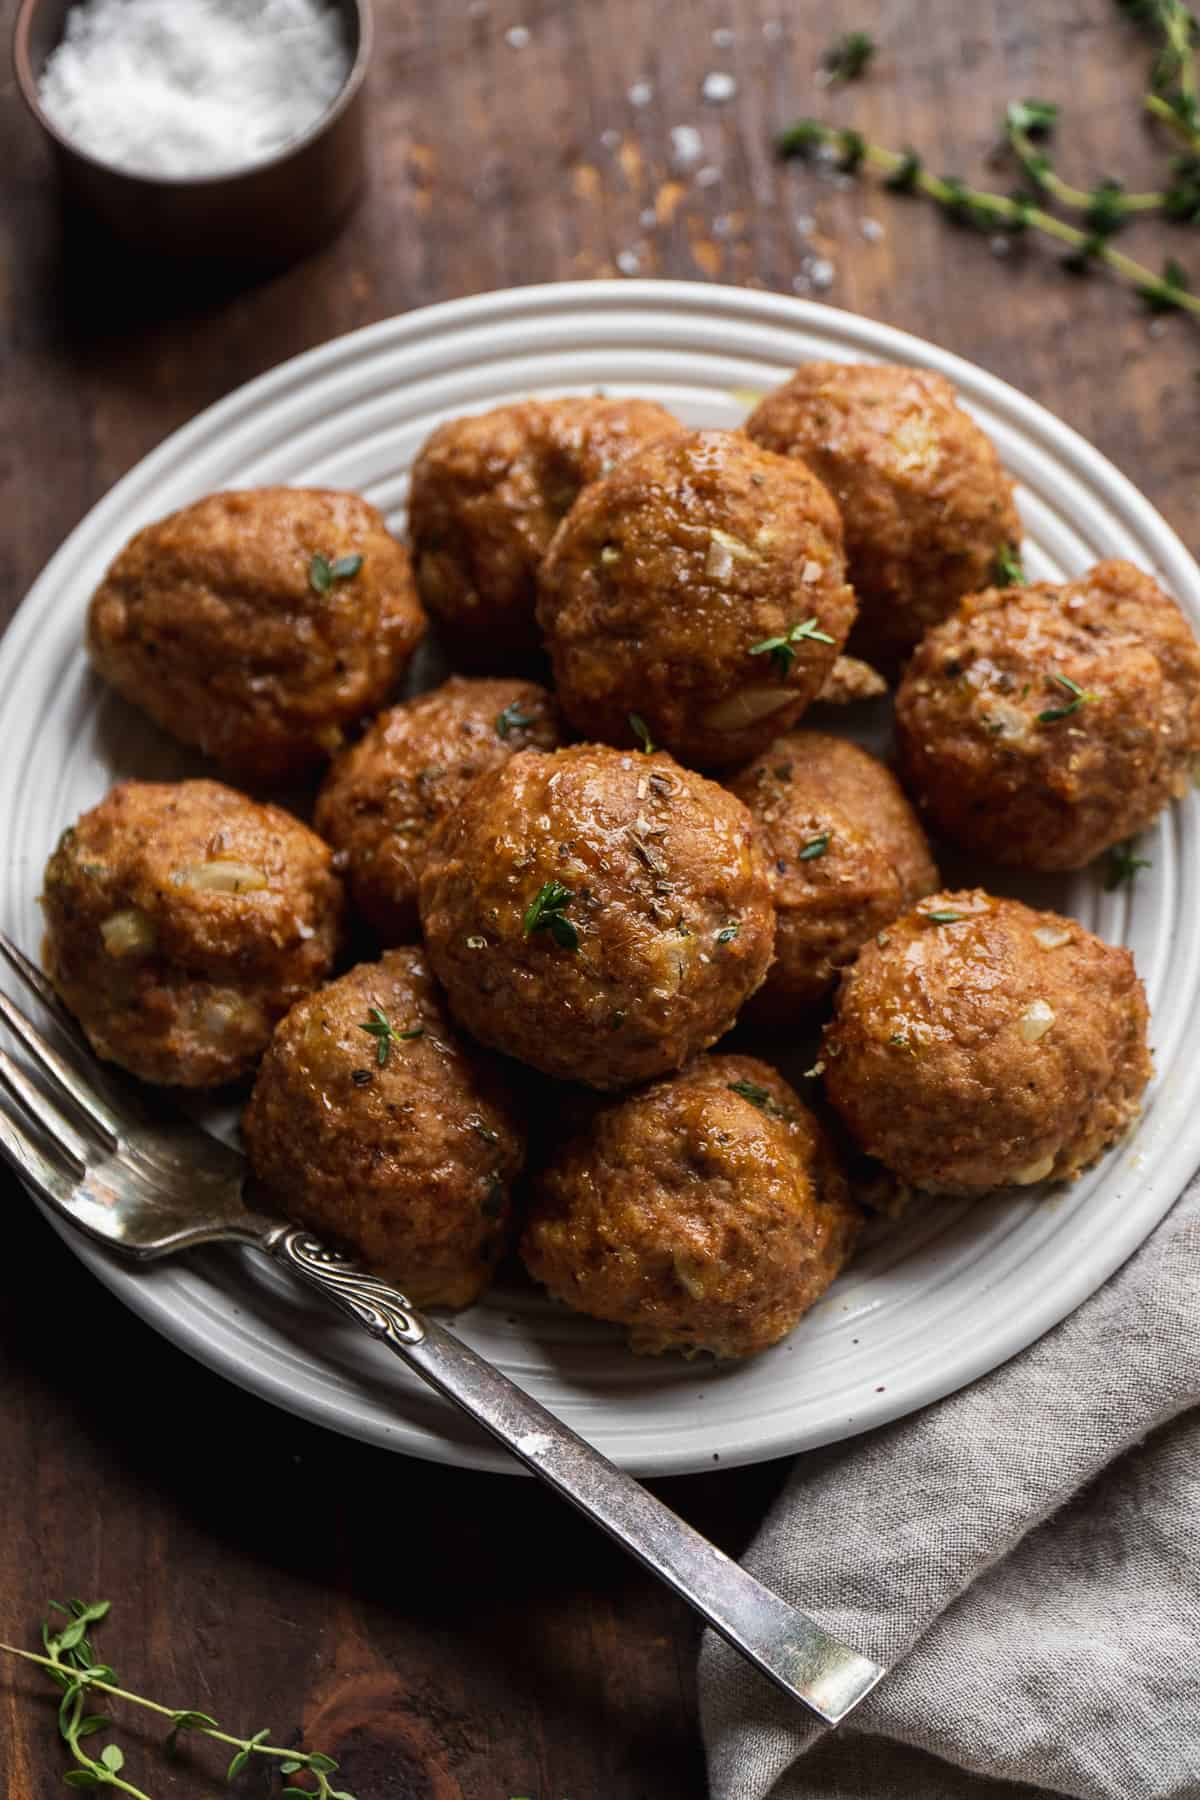 Baked gluten free turkey meatballs on a plate with a fork.